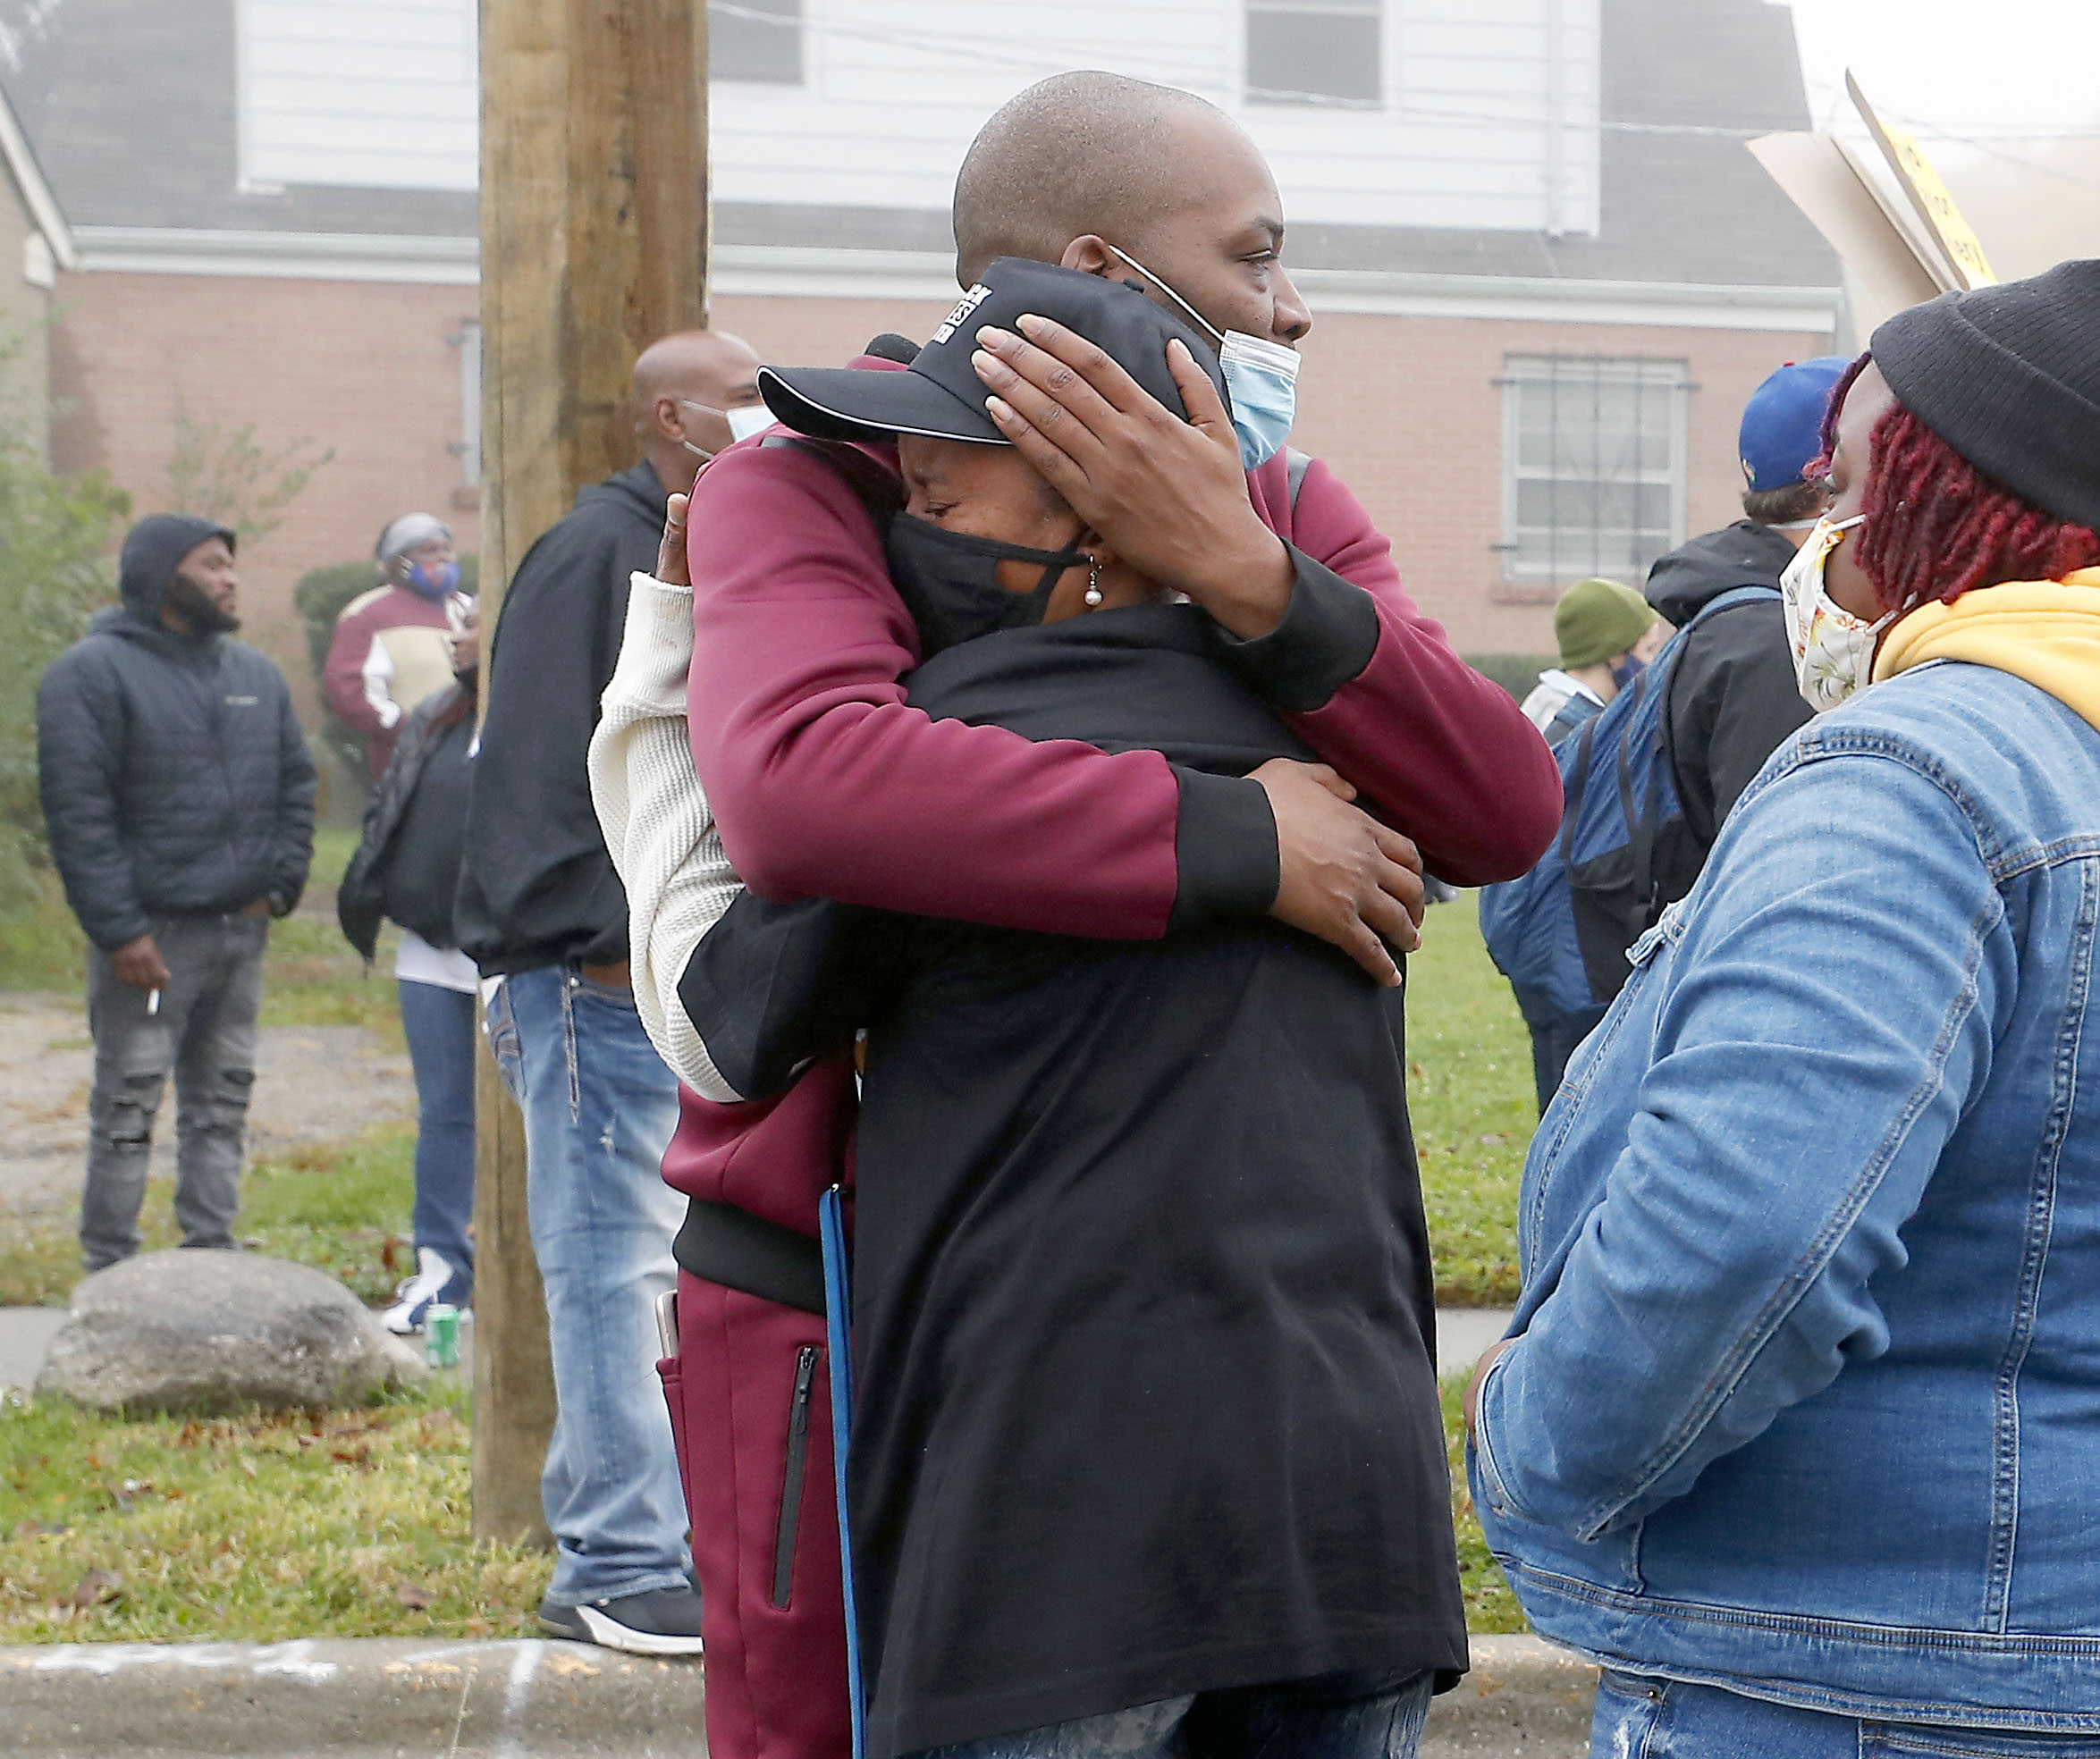 PHOTO: Sherrellis Sheria Stinnette, grandmother of Marcellis Stinnette, 19, is comforted by Rayon Edwards, of Waukegan, Ill., during a protest rally for Marcellis Stinnette who was killed by Waukegan Police in Waukegan, Ill., Oct. 22, 2020.